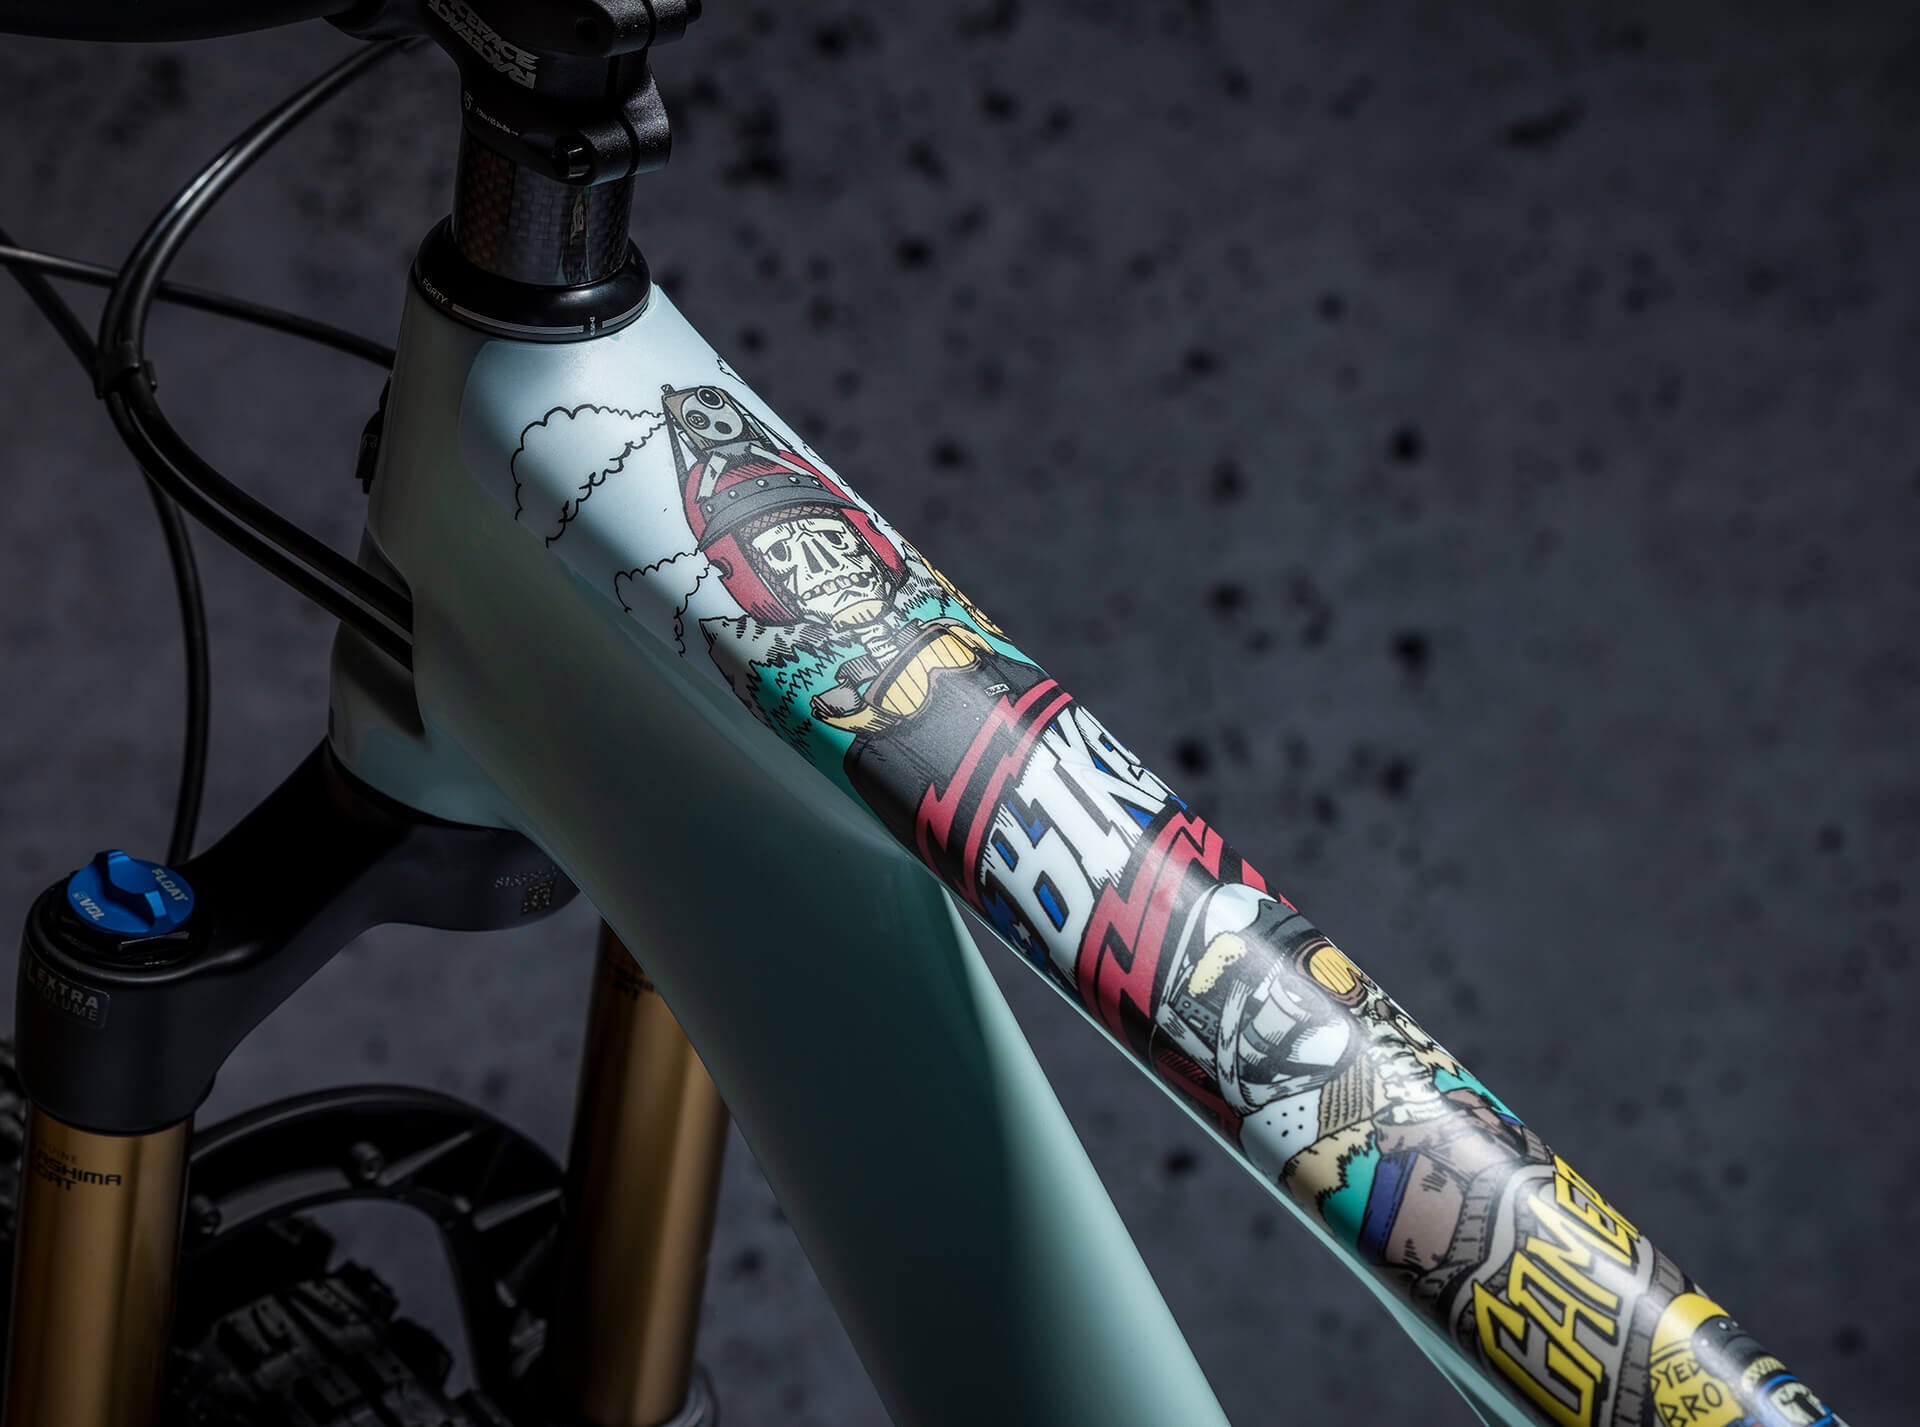 All Mountain Style Frame Protection XL